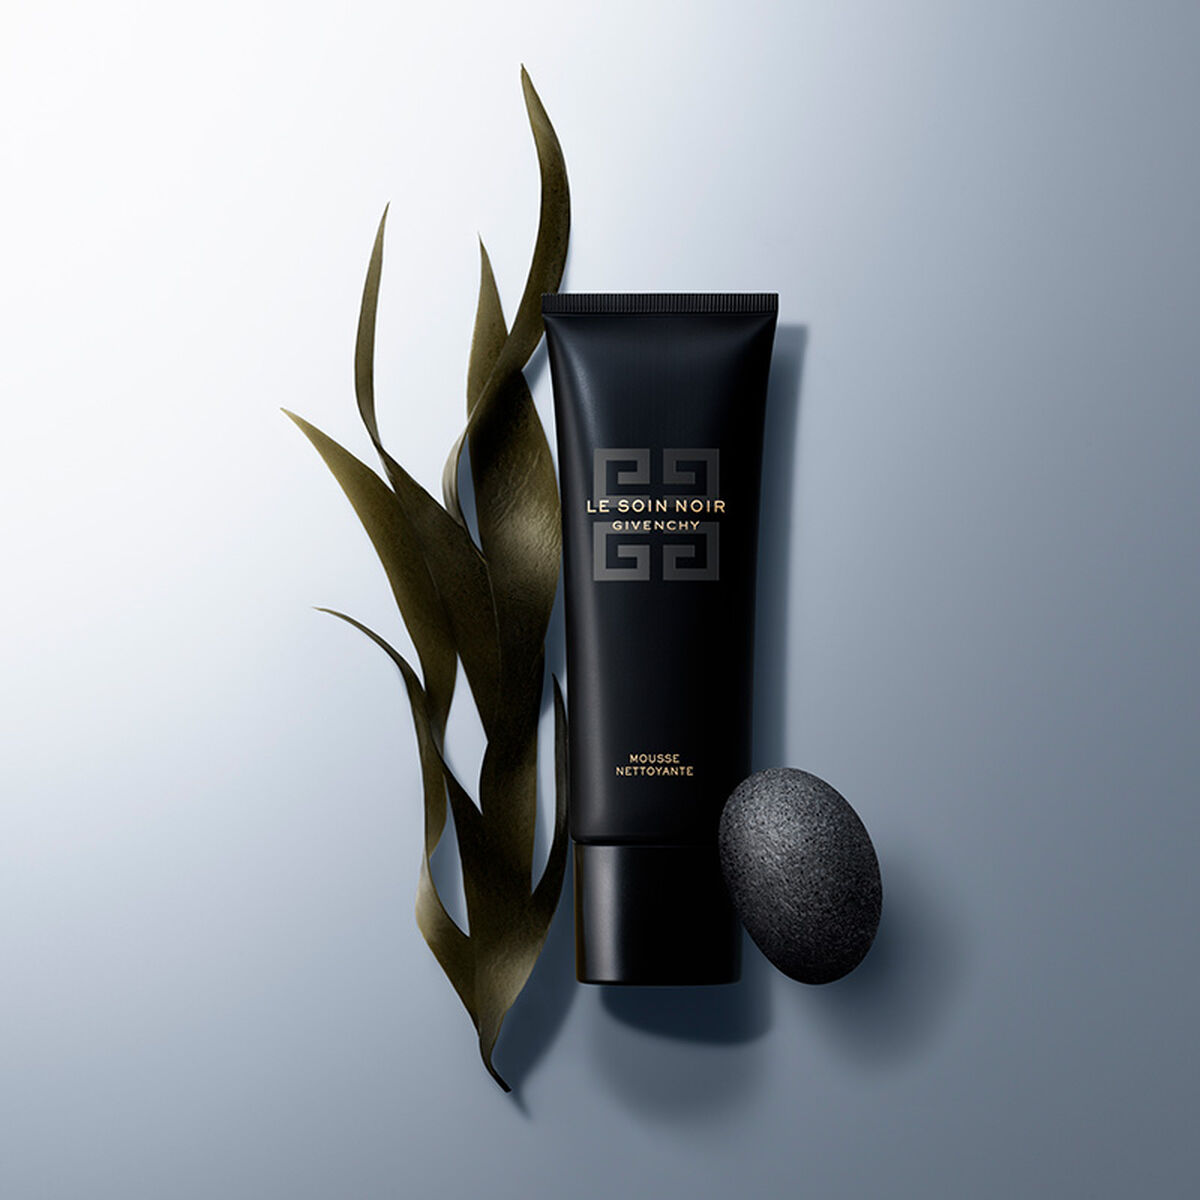 Sữa Rửa Mặt GIVENCHY Le Soin Noir Cleanser - Purifying Cleansing Foam